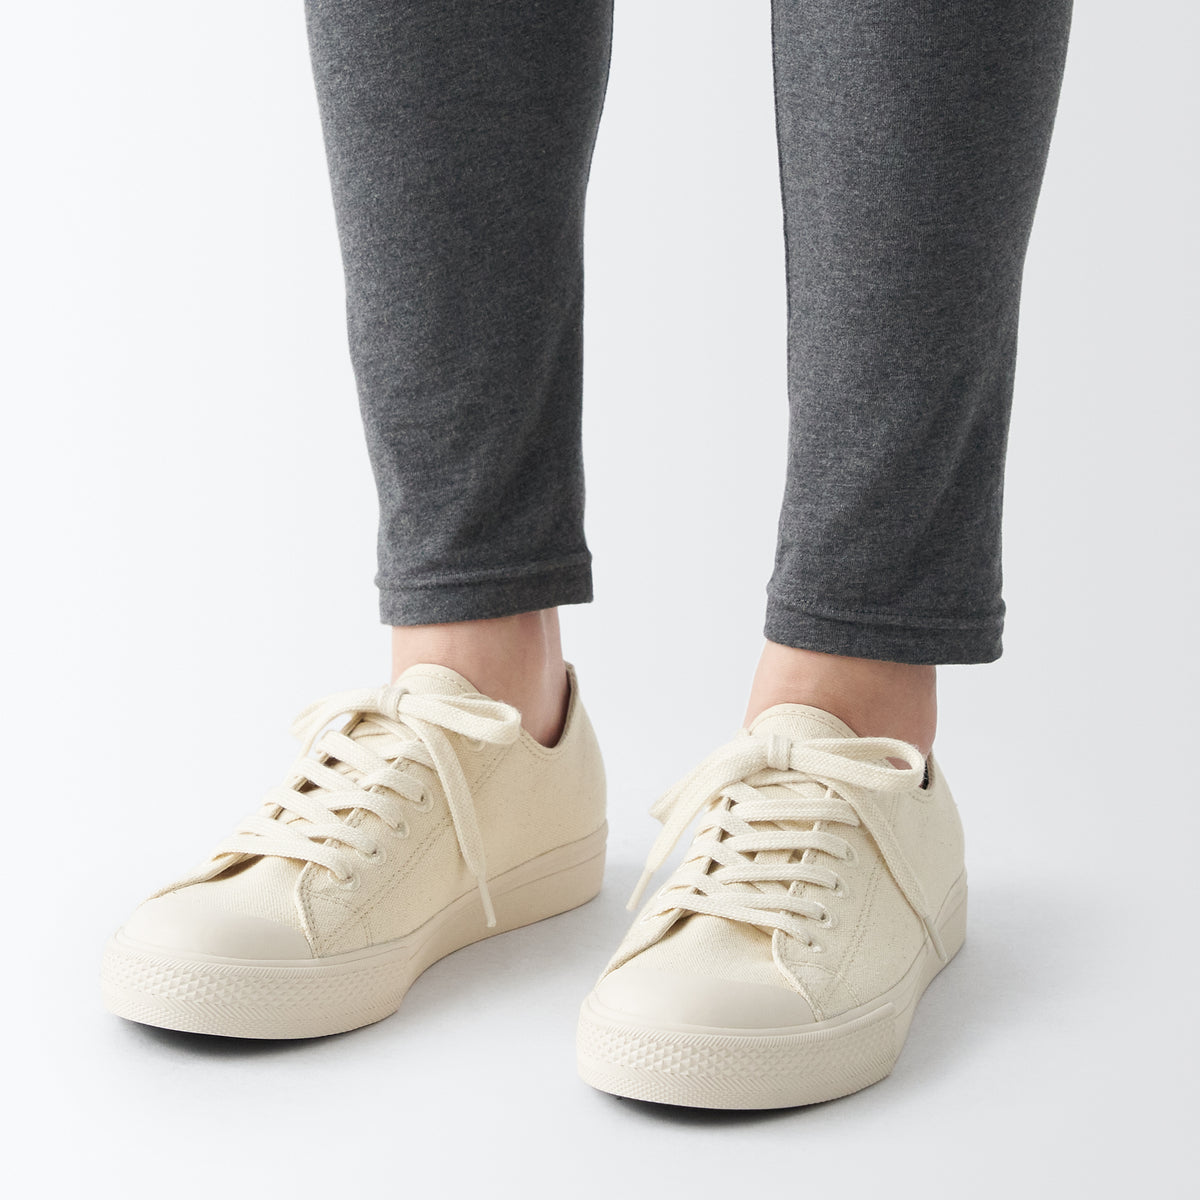 Classic White Sneakers - Size 40 (9.5)